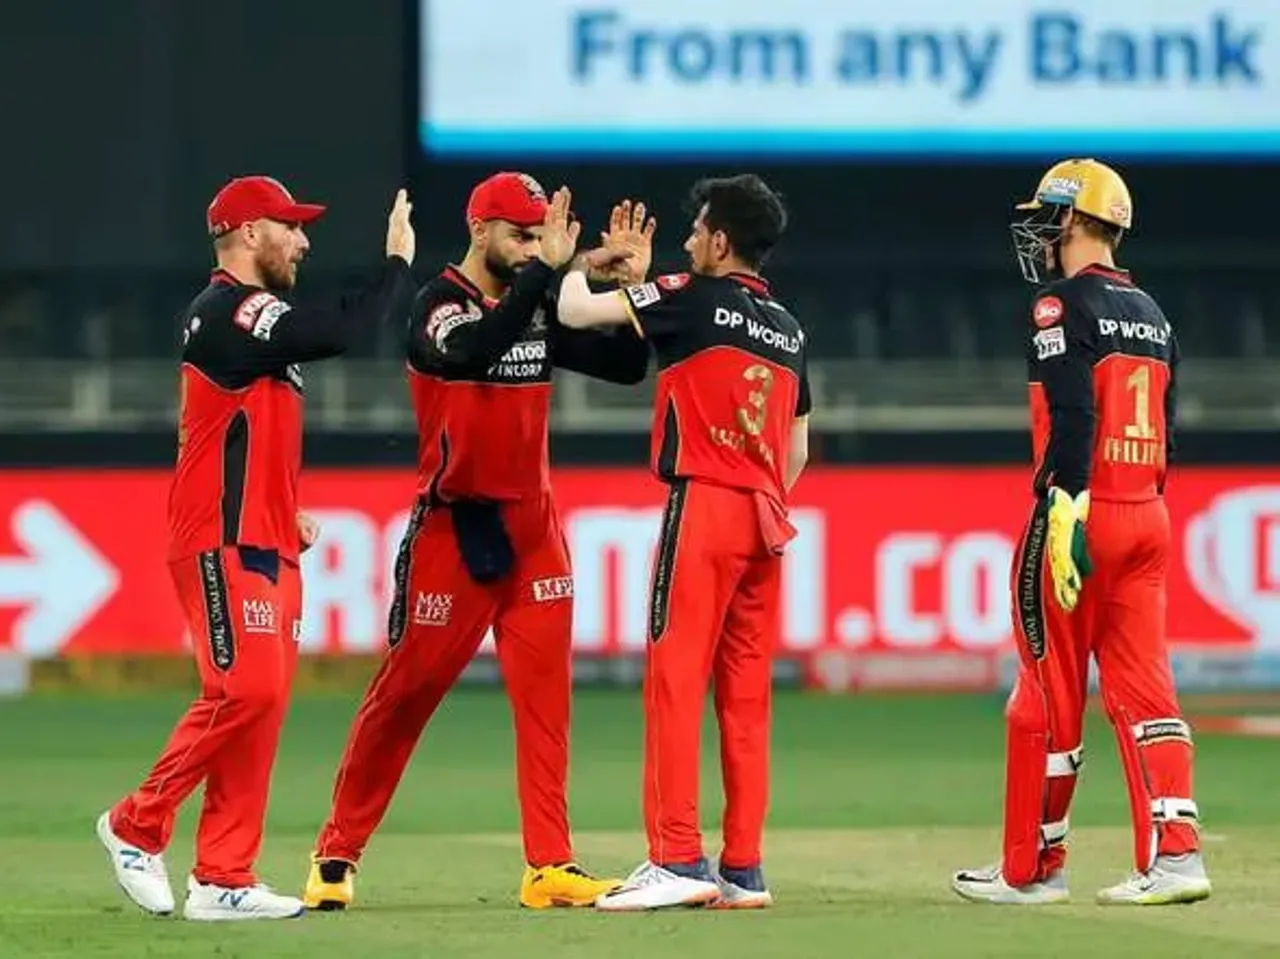 Who will be the captain of the RCB team after the IPL 2021 | SportzPoint